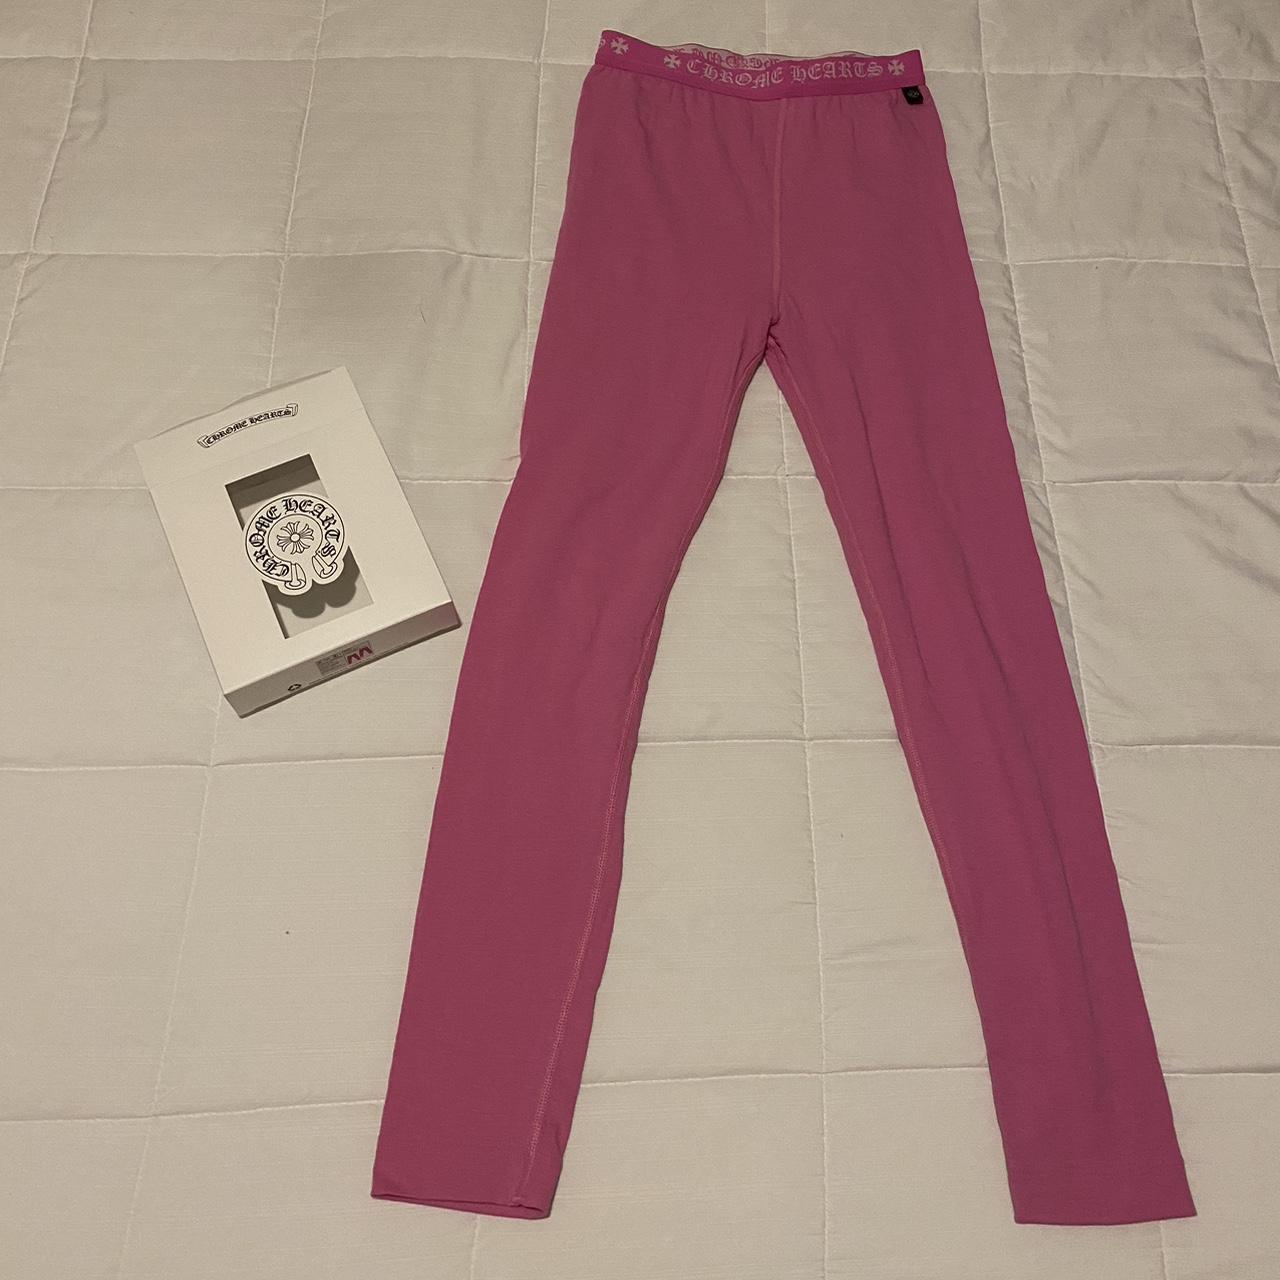 pink chrome hearts leggings, never worn only tried - Depop